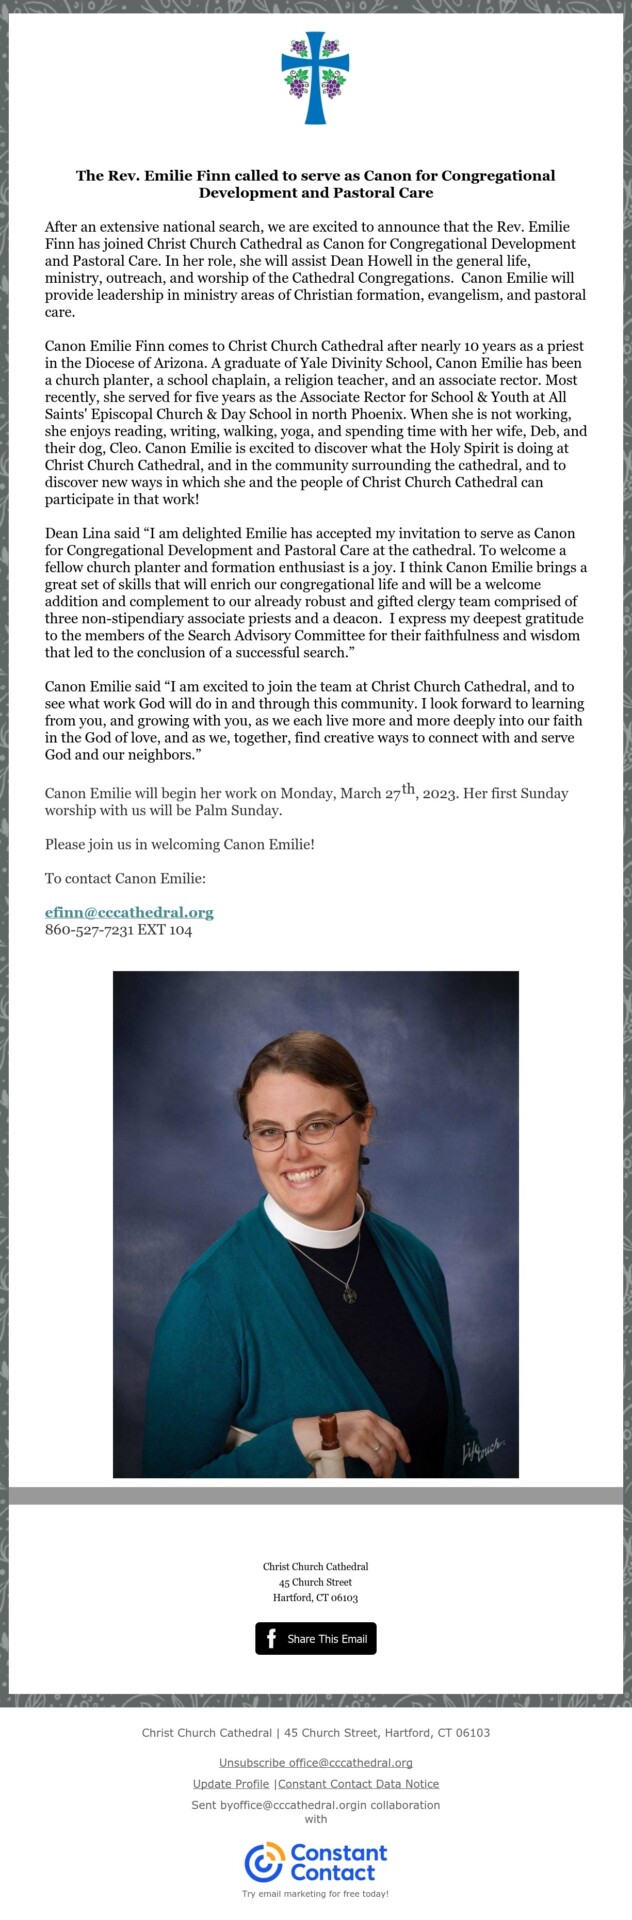 Join us in welcoming our Canon for Congregational Development and Pastoral Care